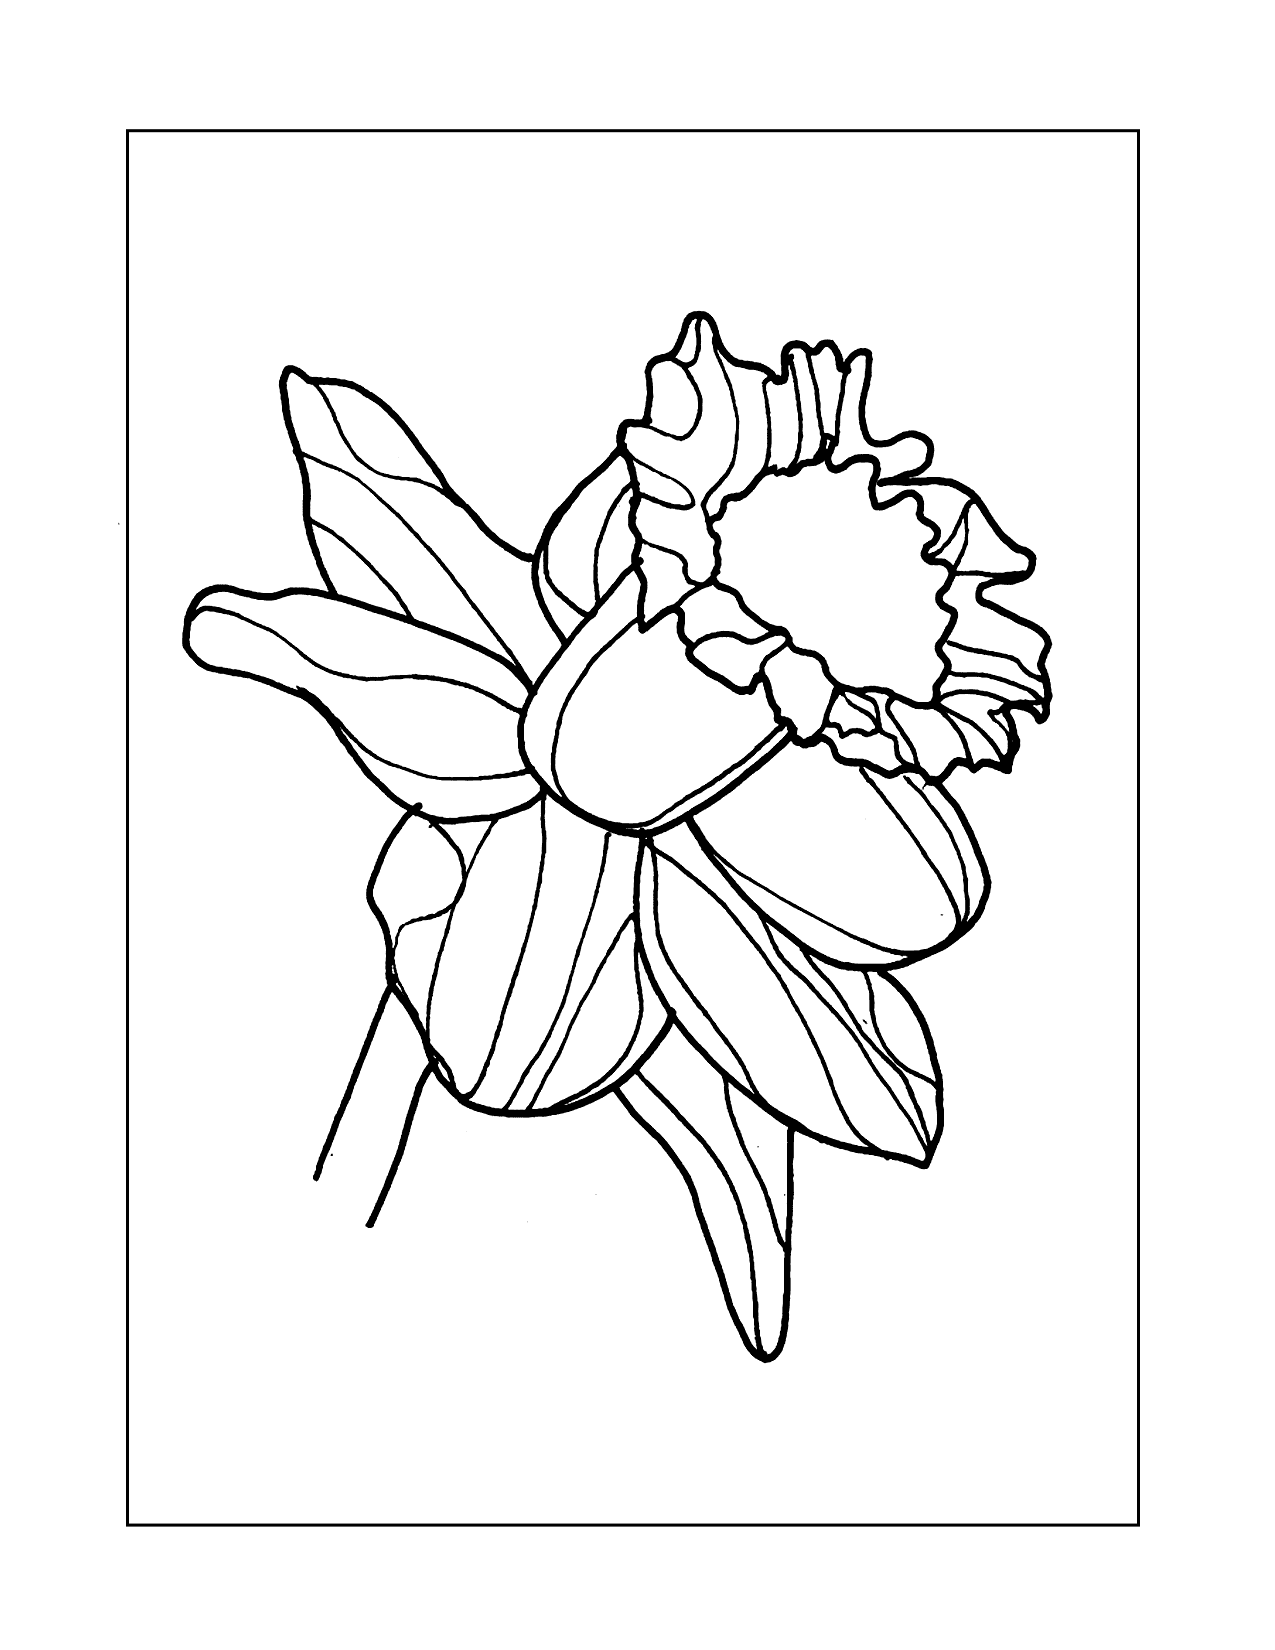 Single Daffodil Flower Coloring Page